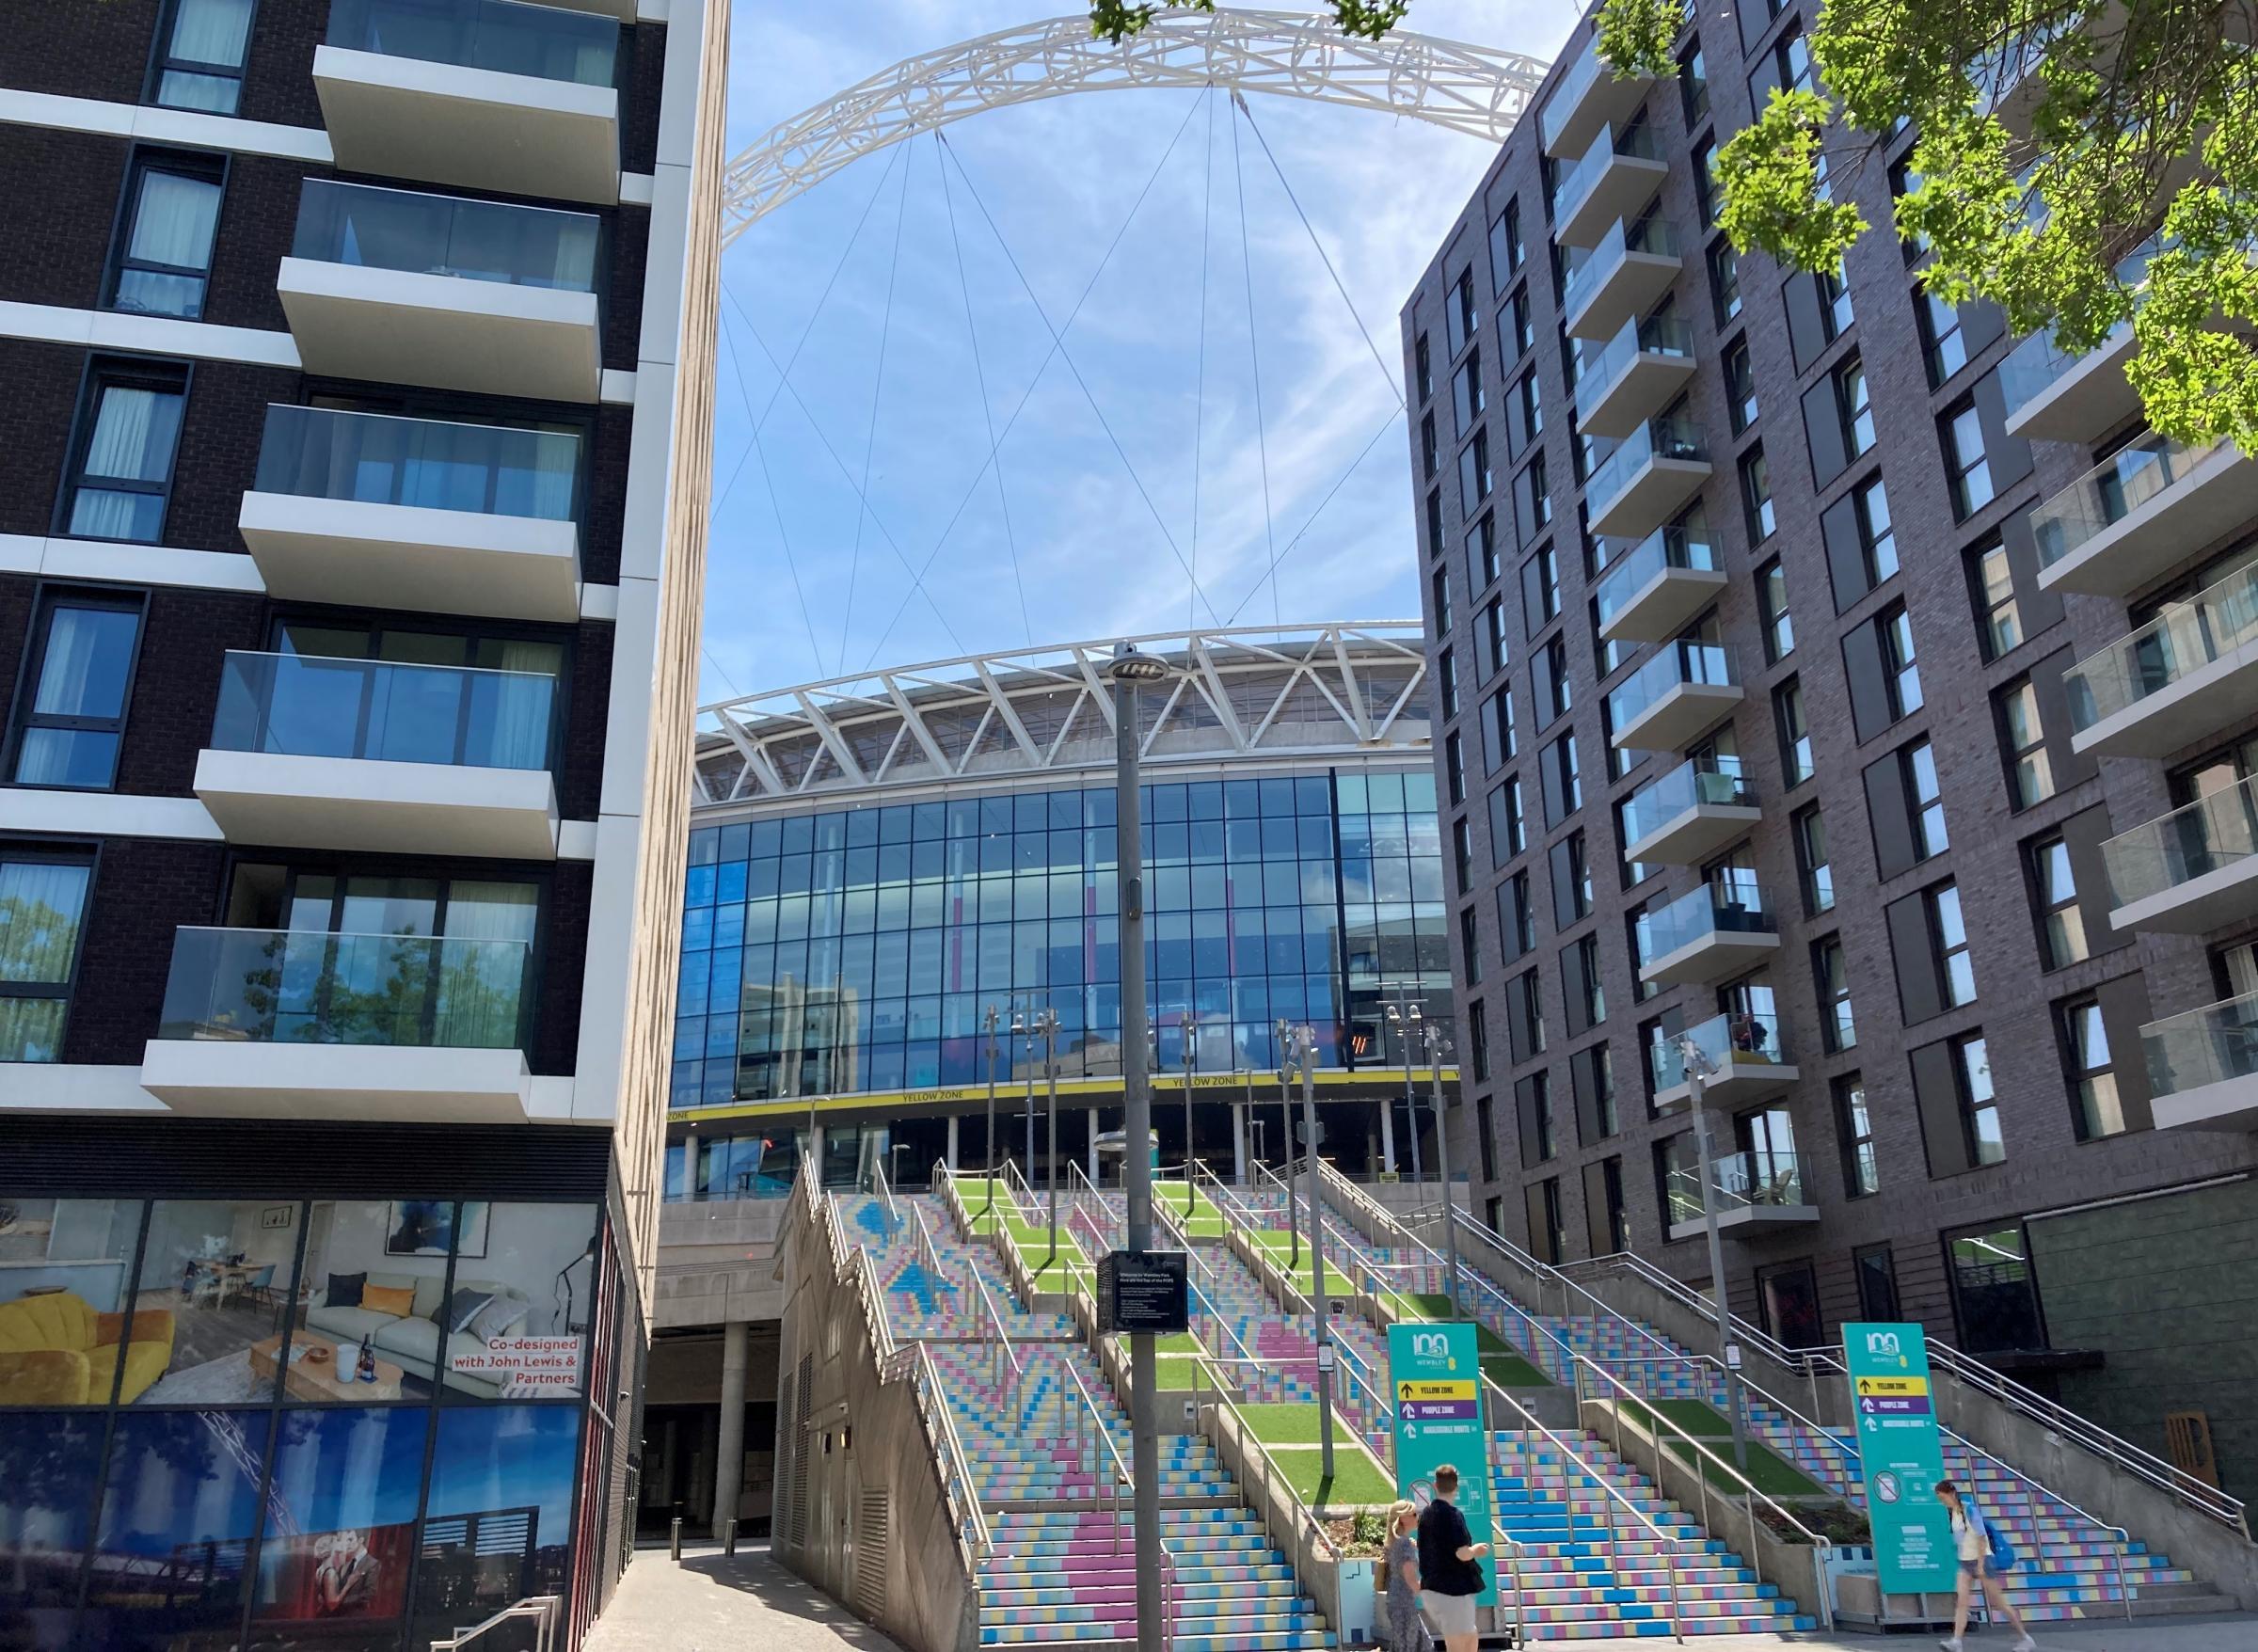 View Of The Stadium Behind The Flats. Brent Council launched its vision for Wembley in 2002 with he stadium at its heart. Image Credit: Grant Williams